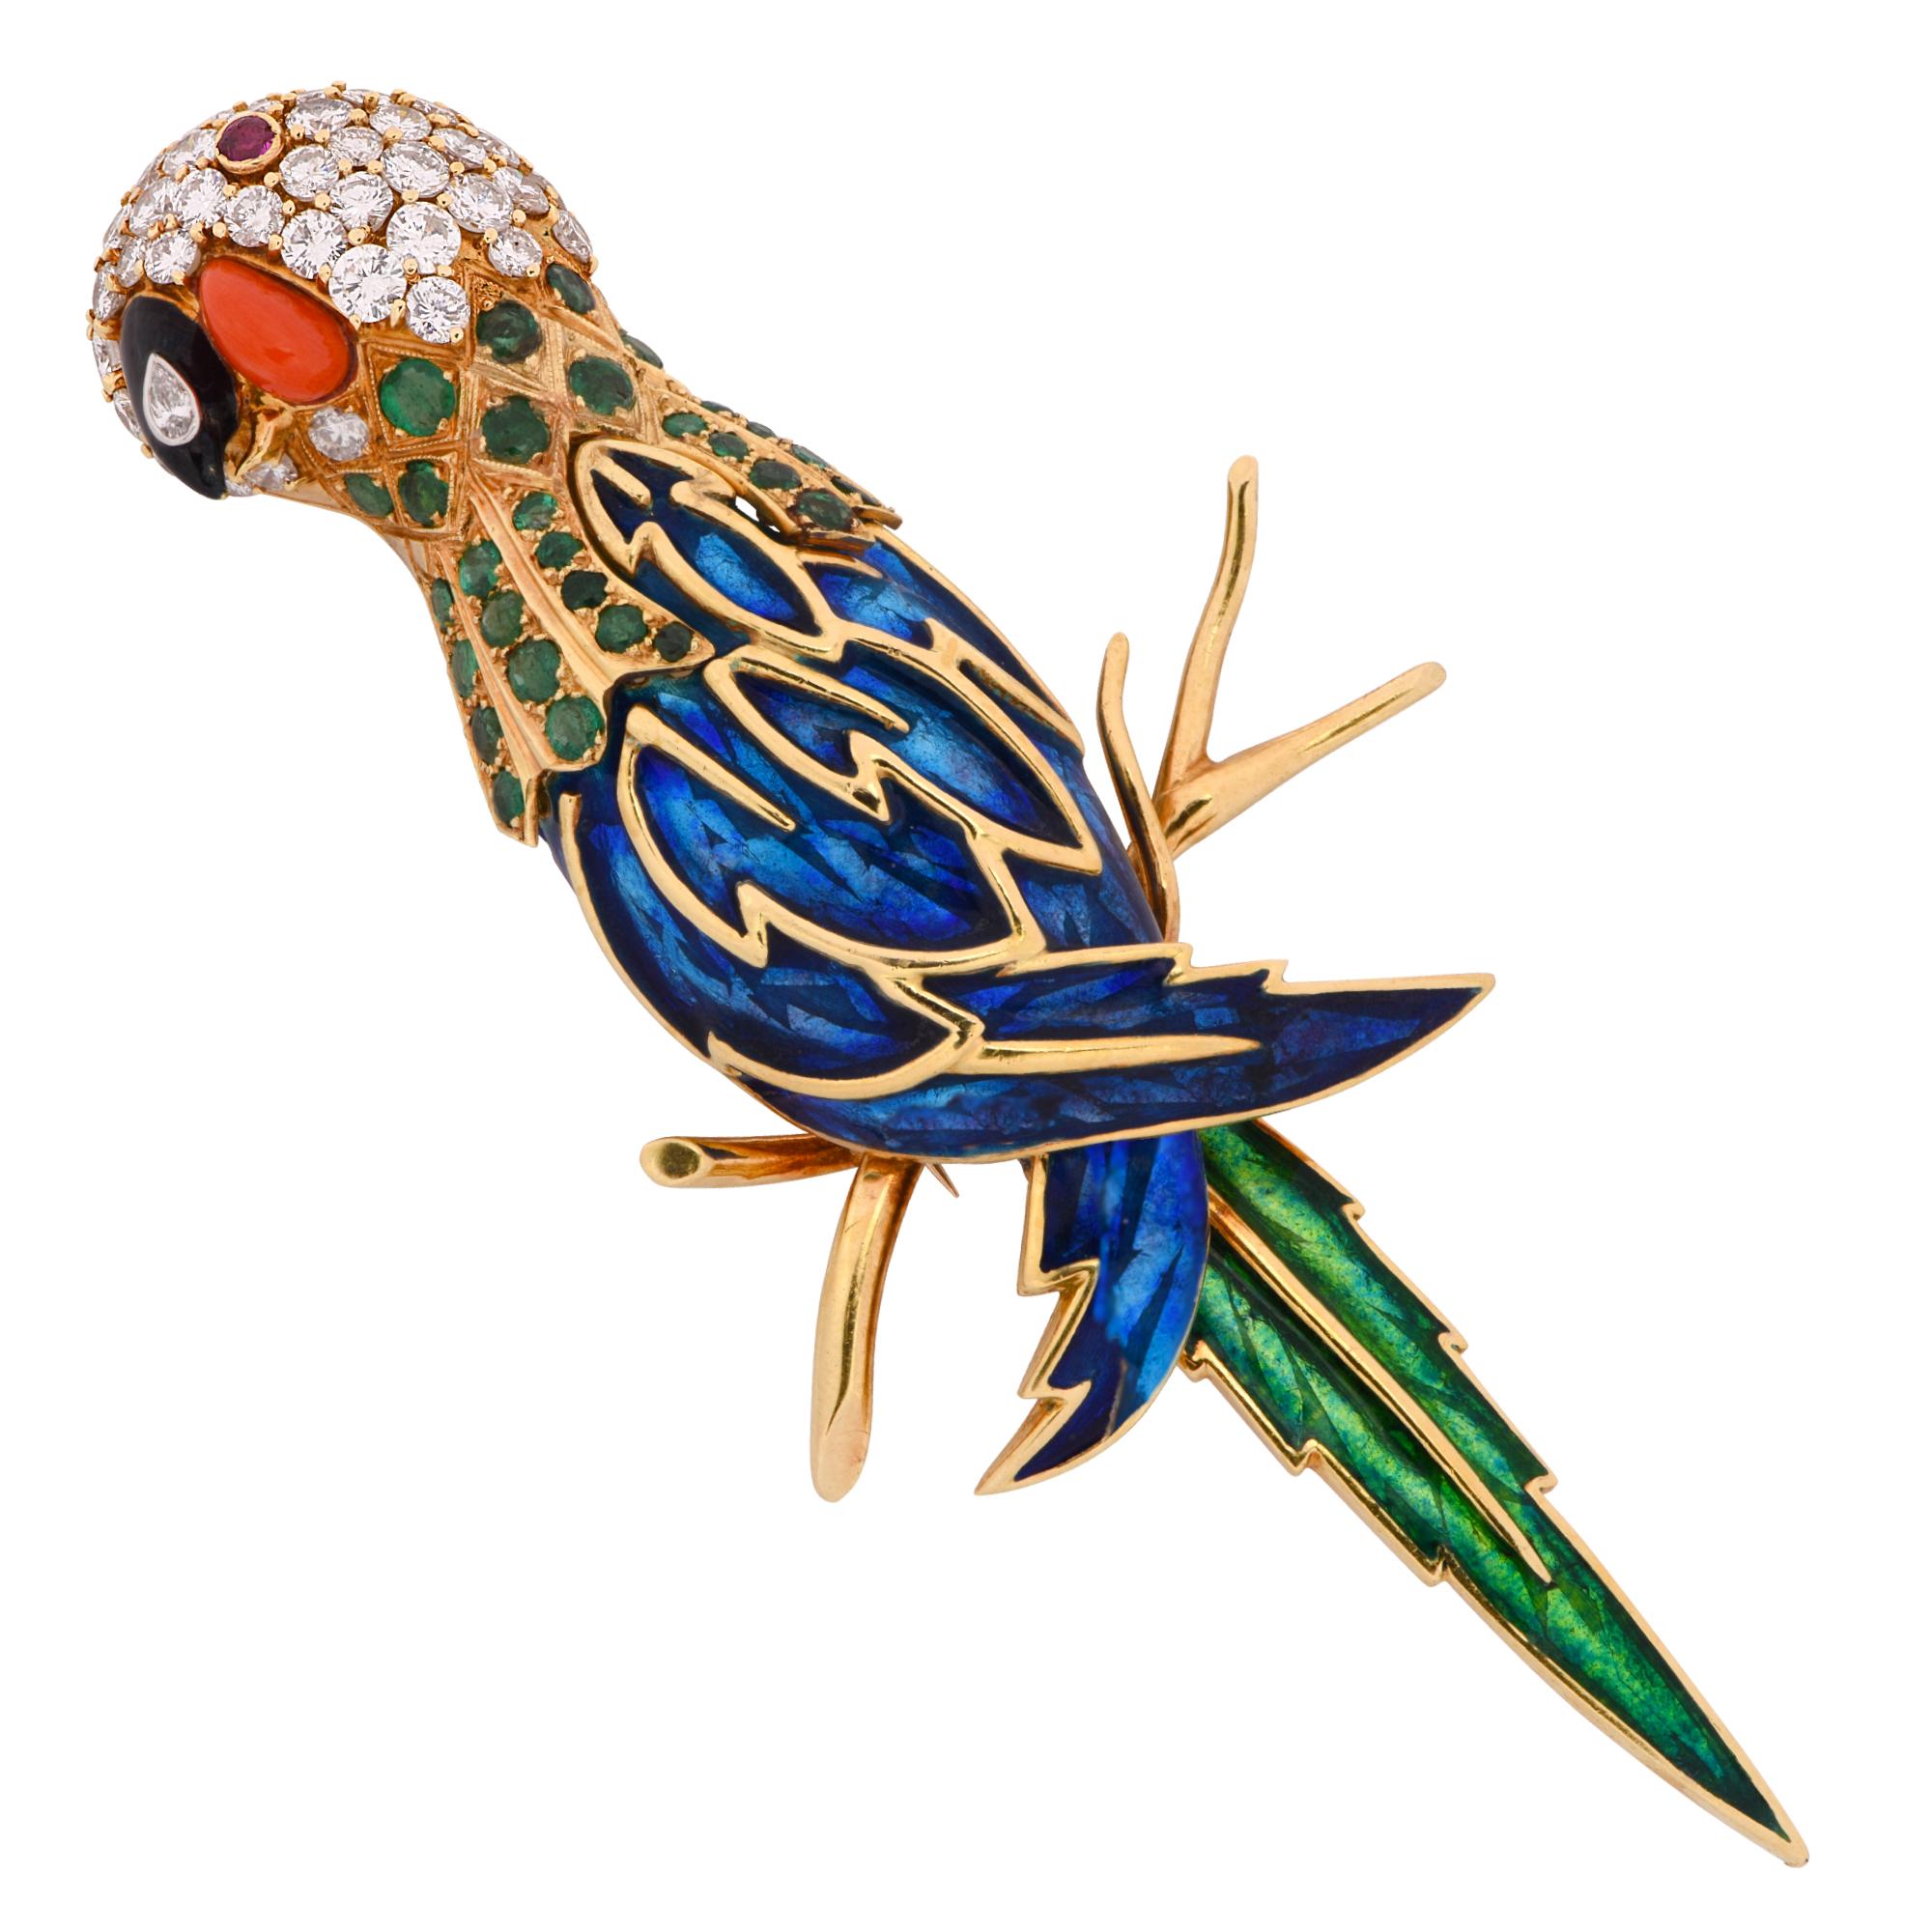 Delightful parrot brooch pin, crafted in 18k yellow gold, featuring approximately 8 carats of round brilliant cut diamonds, G color, VS clarity, accented by approximately 3 carats of round cut emeralds, a coral and onyx cabochon, and blue and green